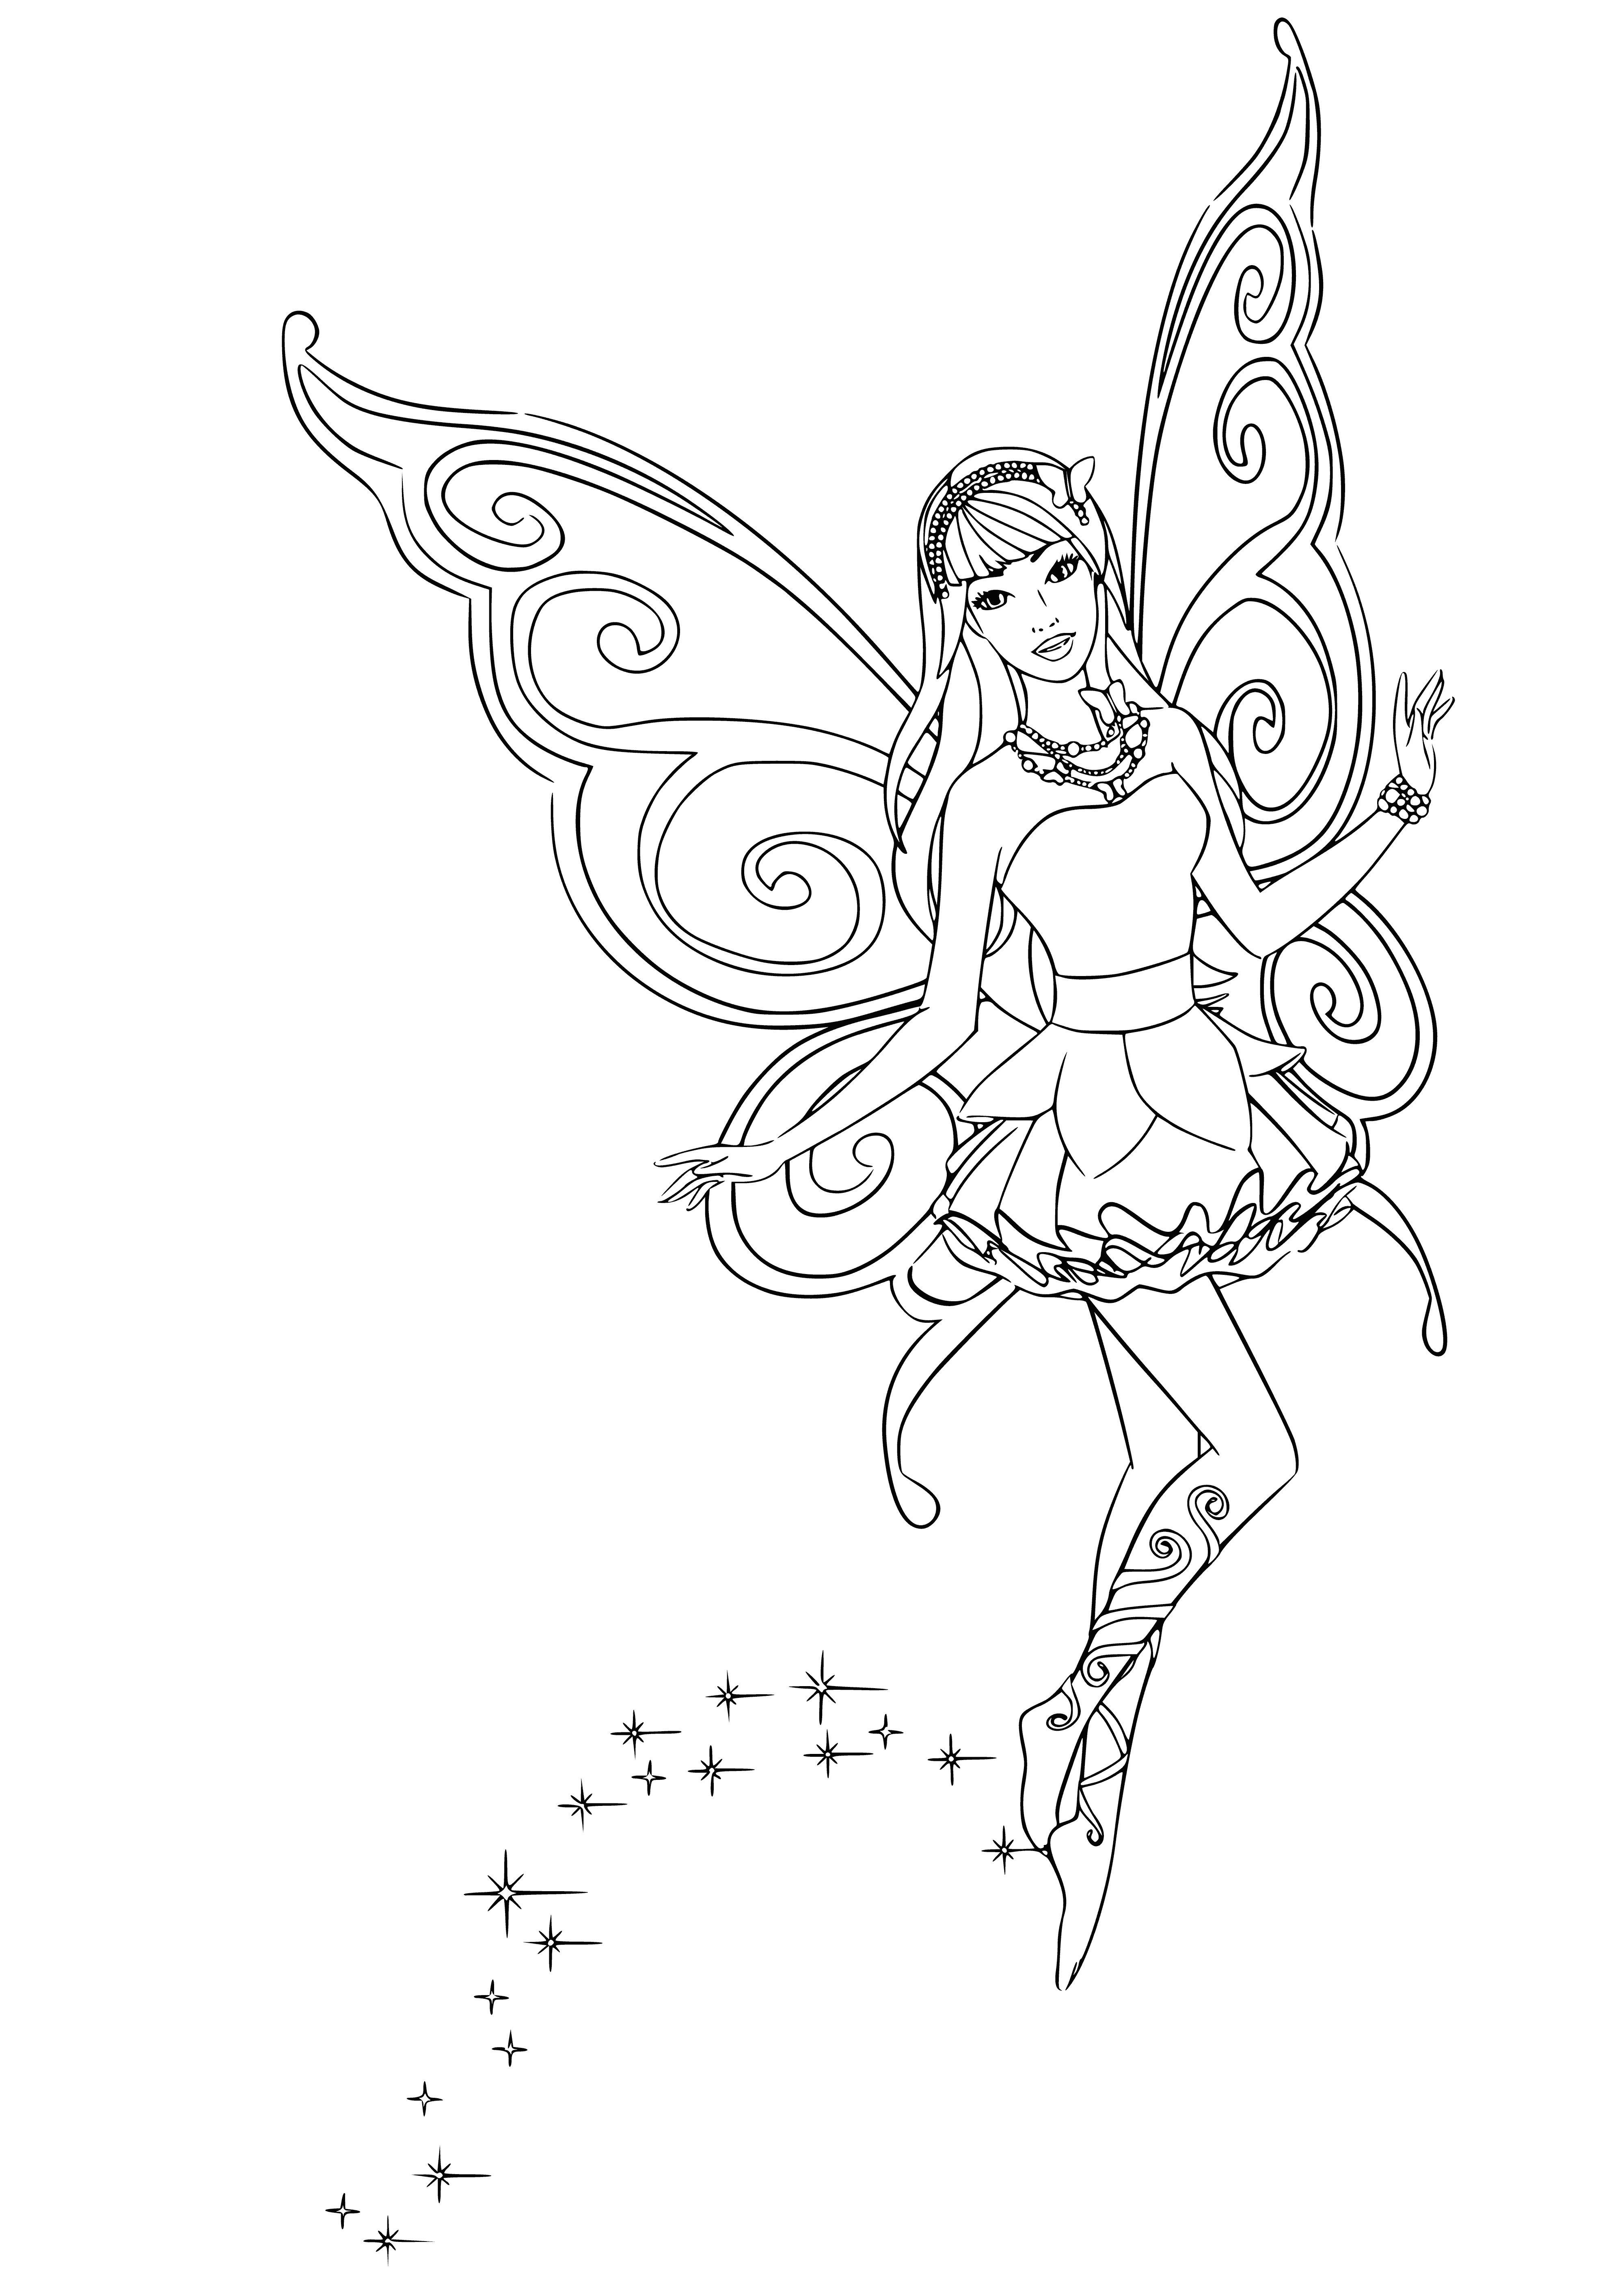 coloring page: Fairy Barbie doll flies in garden wearing purple & yellow dress with wings, holding wand.